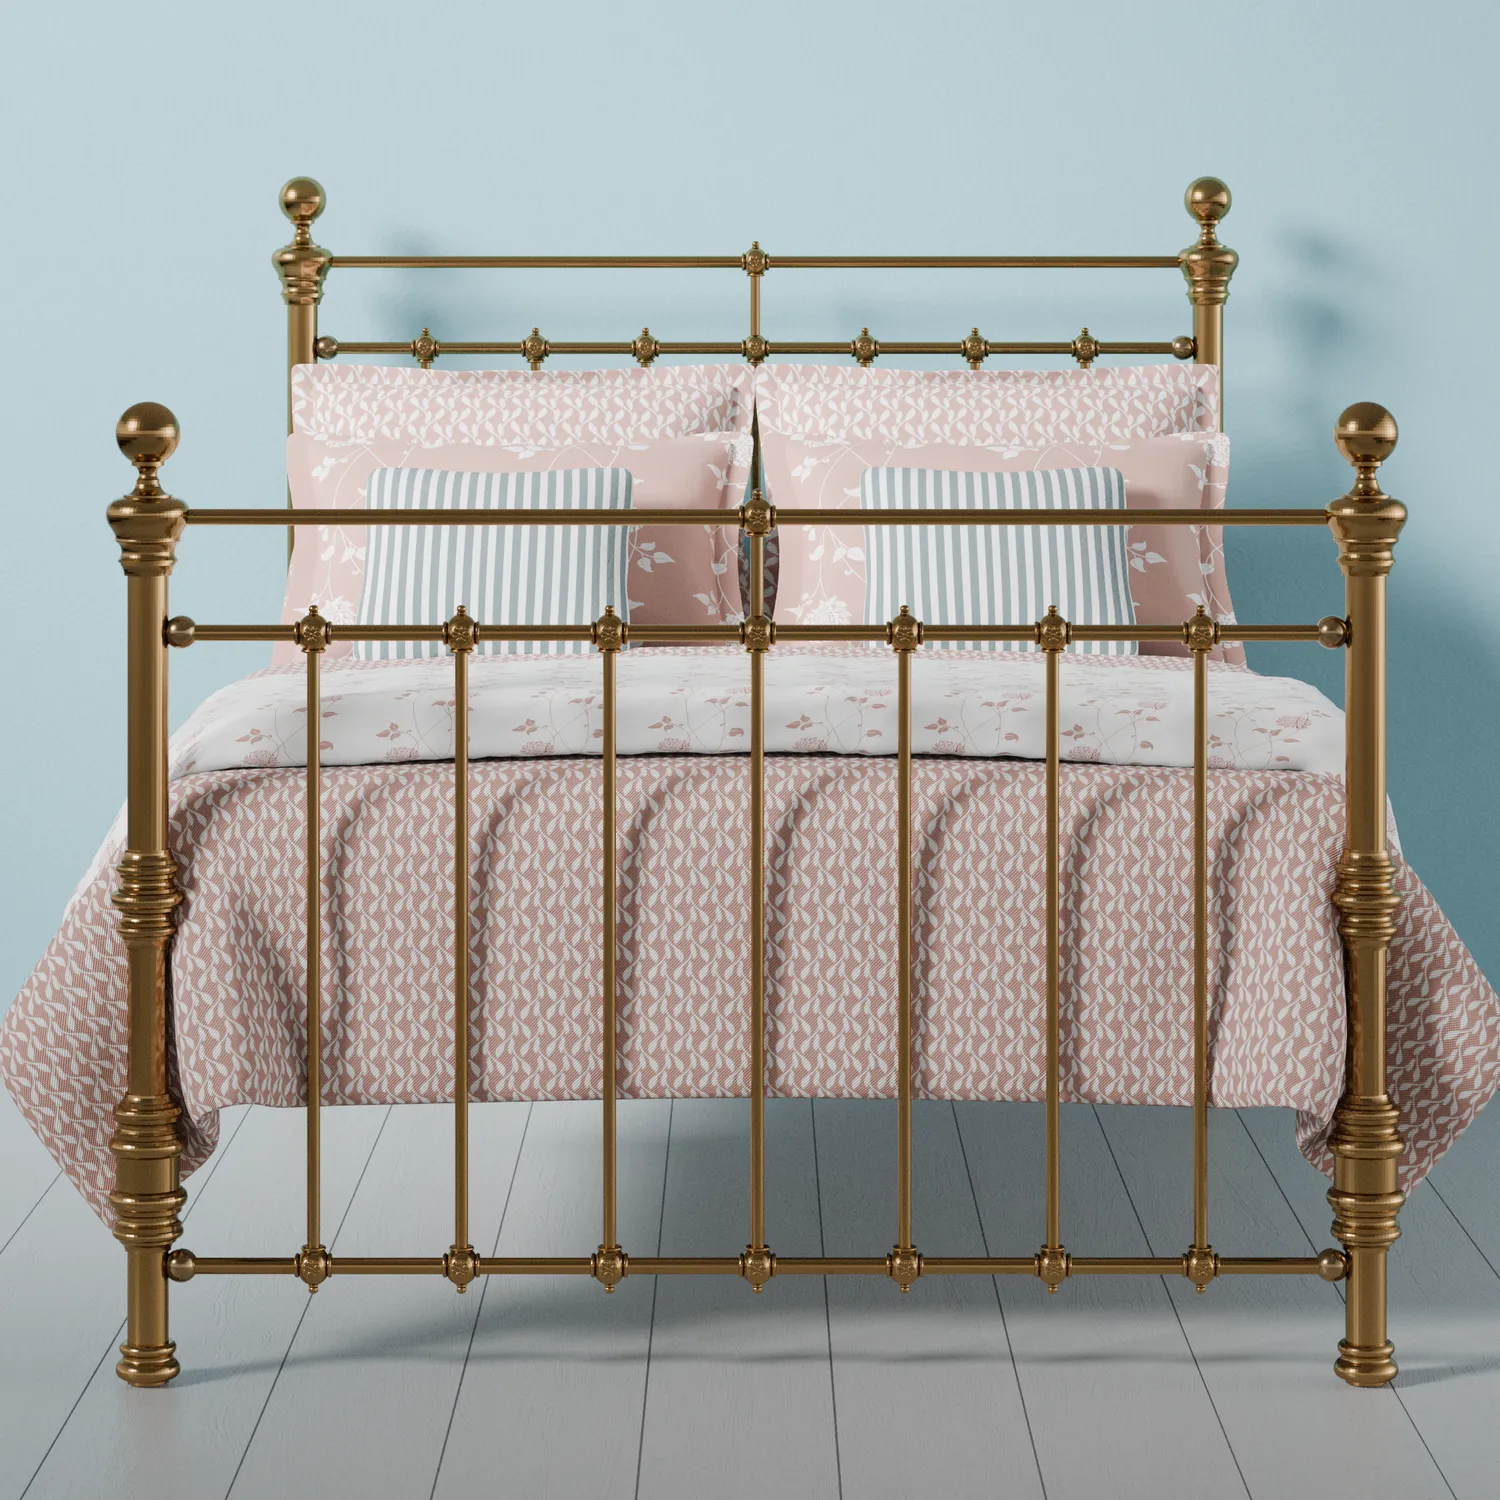 https://www.obc-uk.net/static/images/resized/1500px/beds/brass/waterford-brass-bed-icon-set.webp